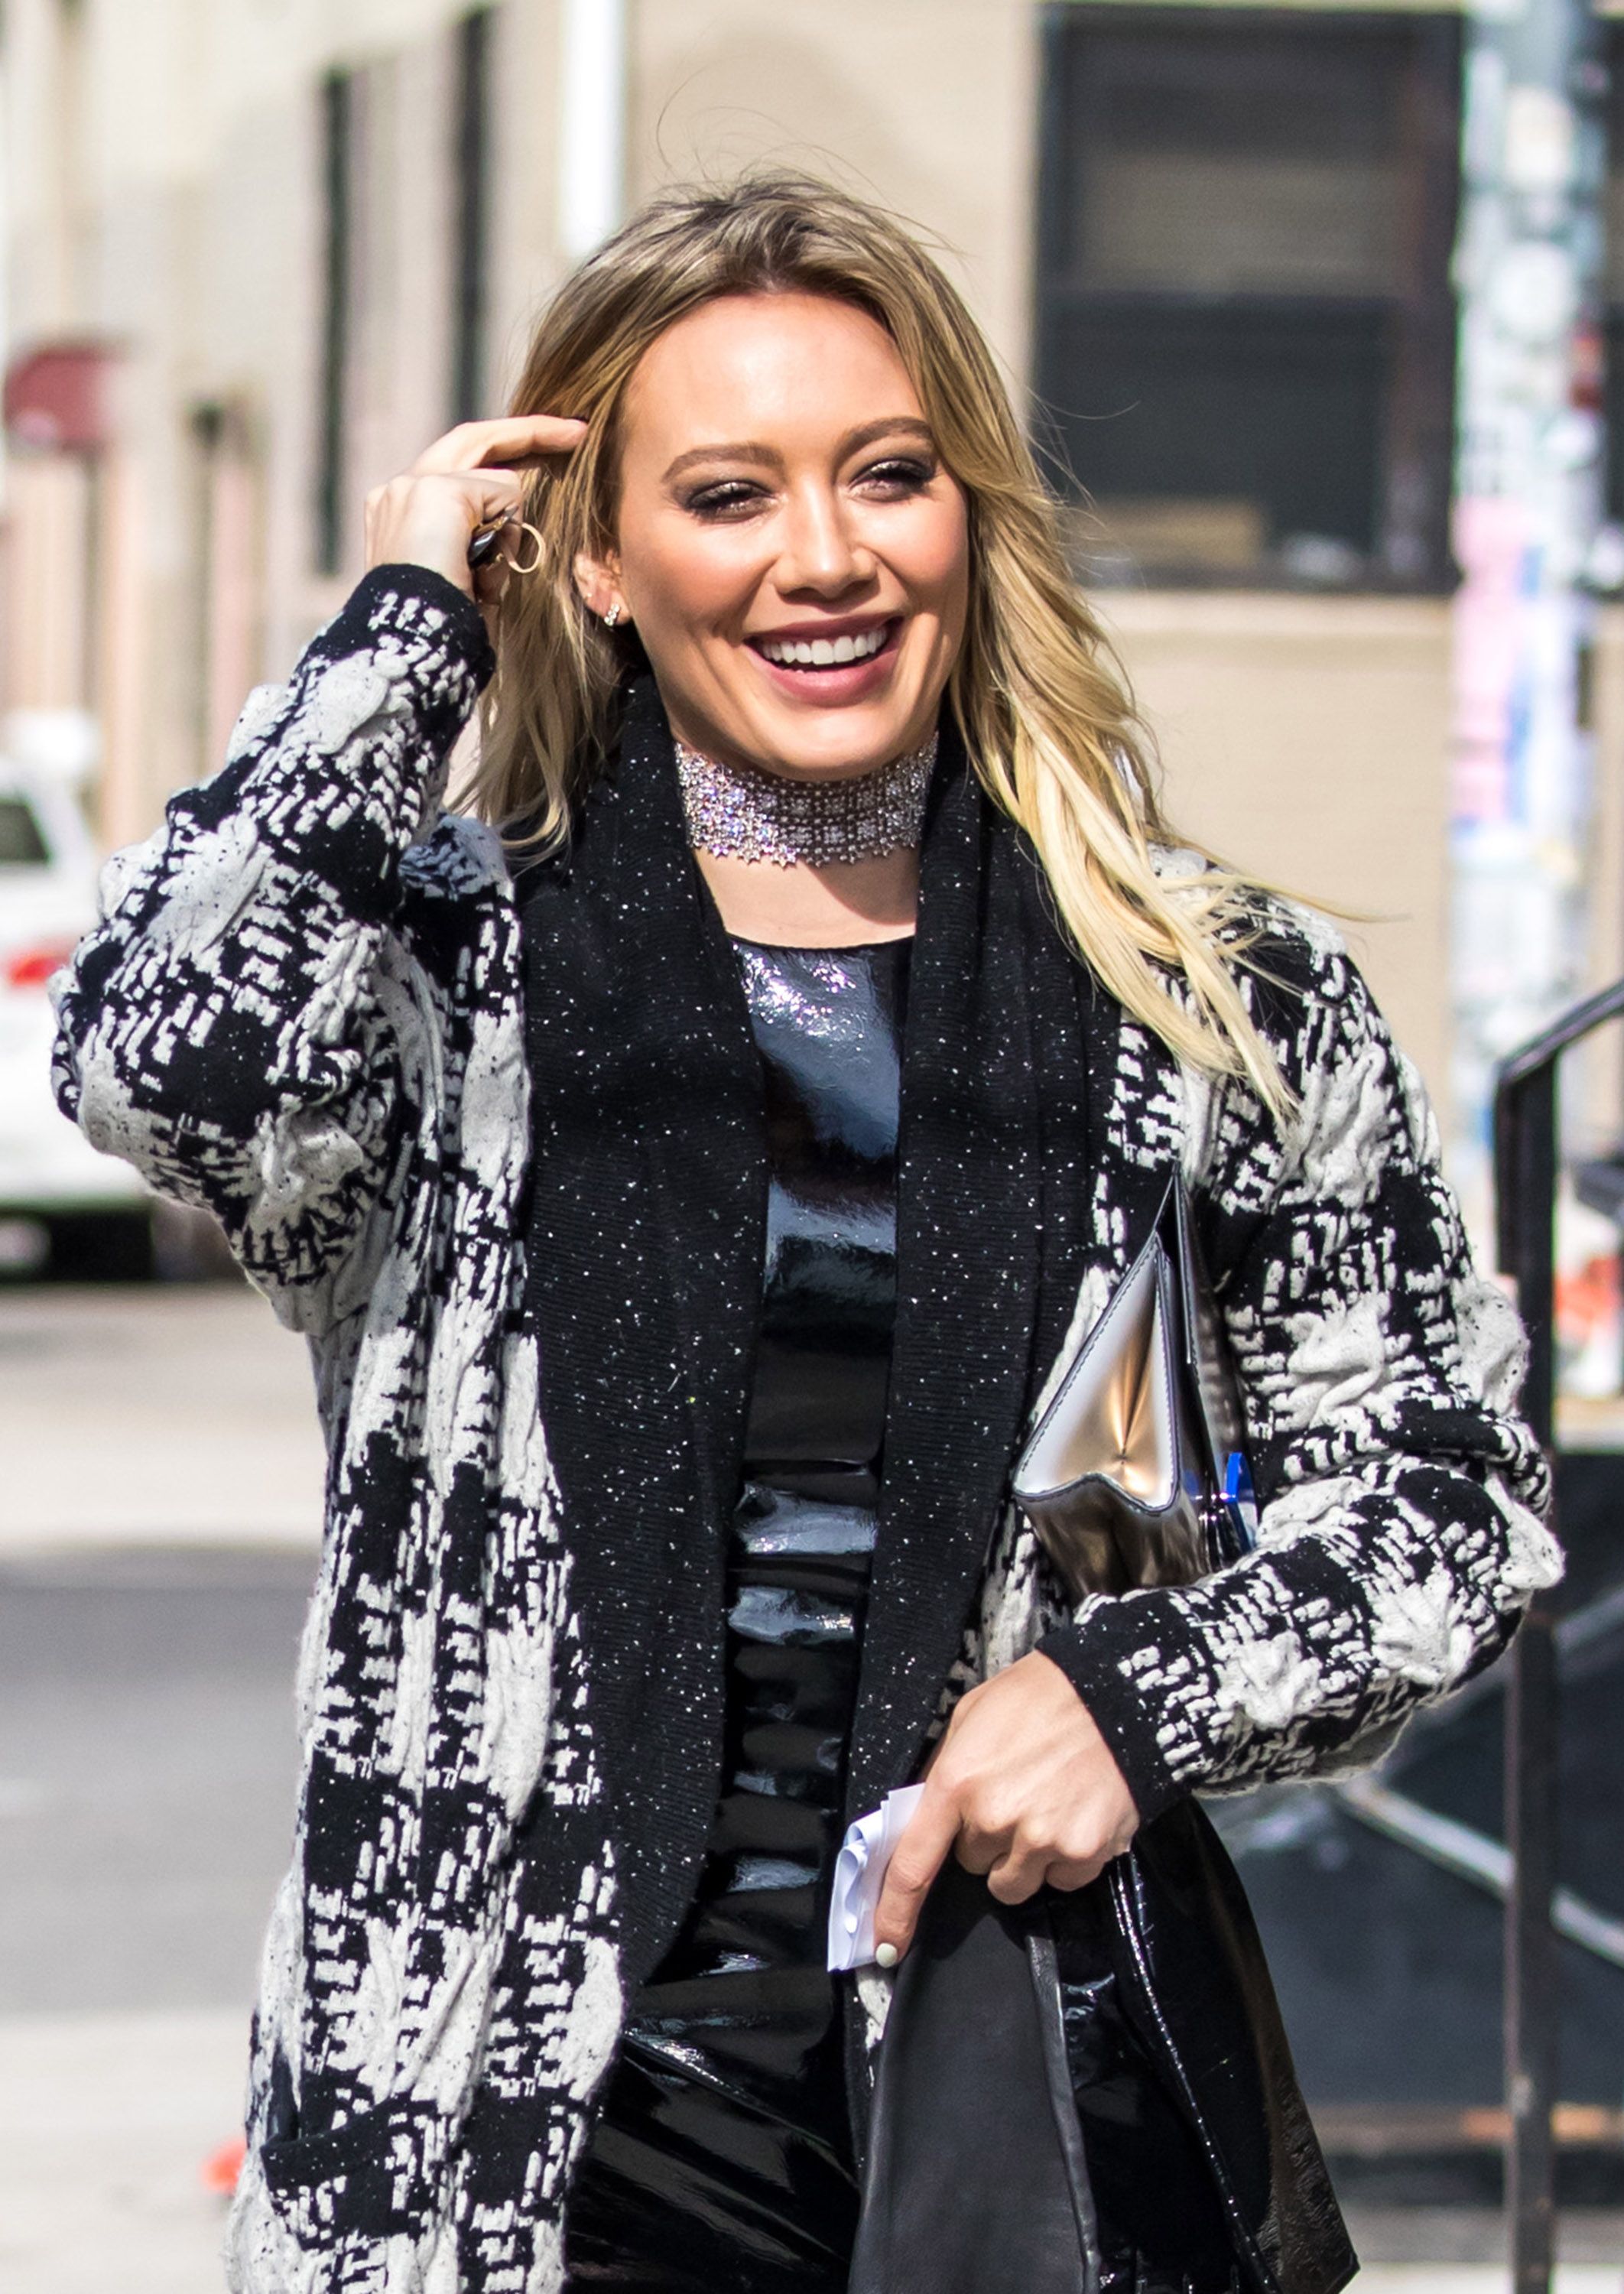 Hilary Duff Dressed In Leather, Looking Thick #79538560